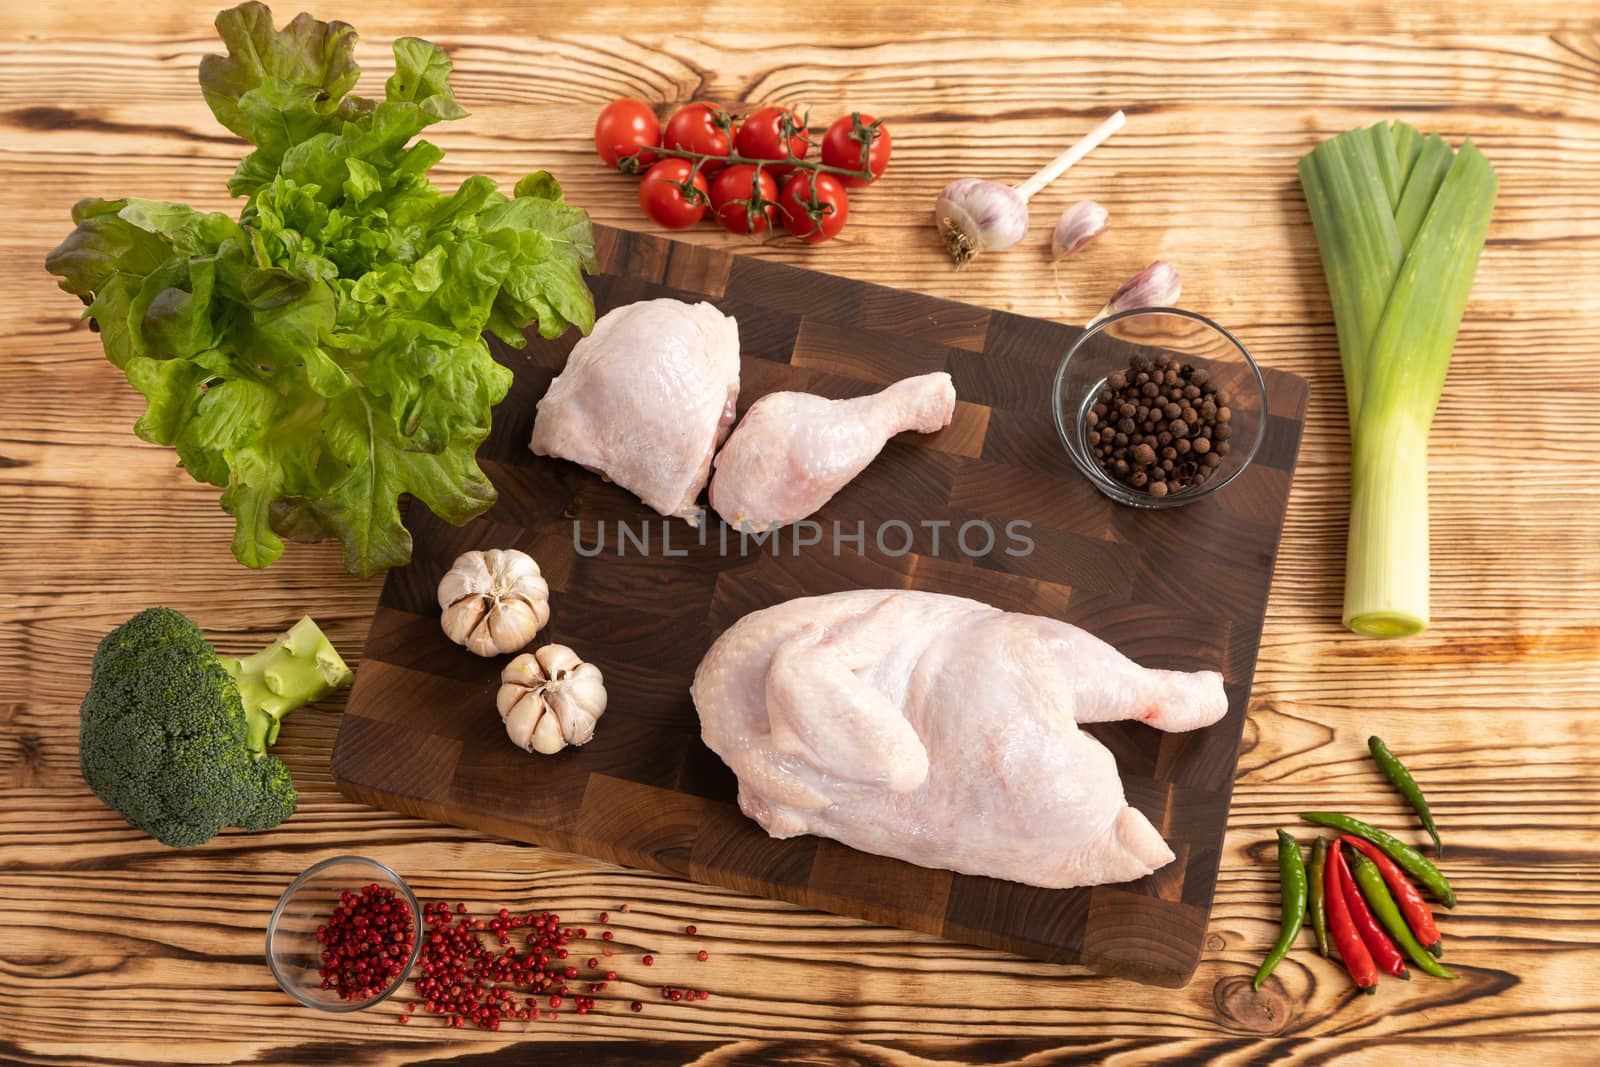 Raw chicken and vegetables for cooking lie on a wooden cutting board